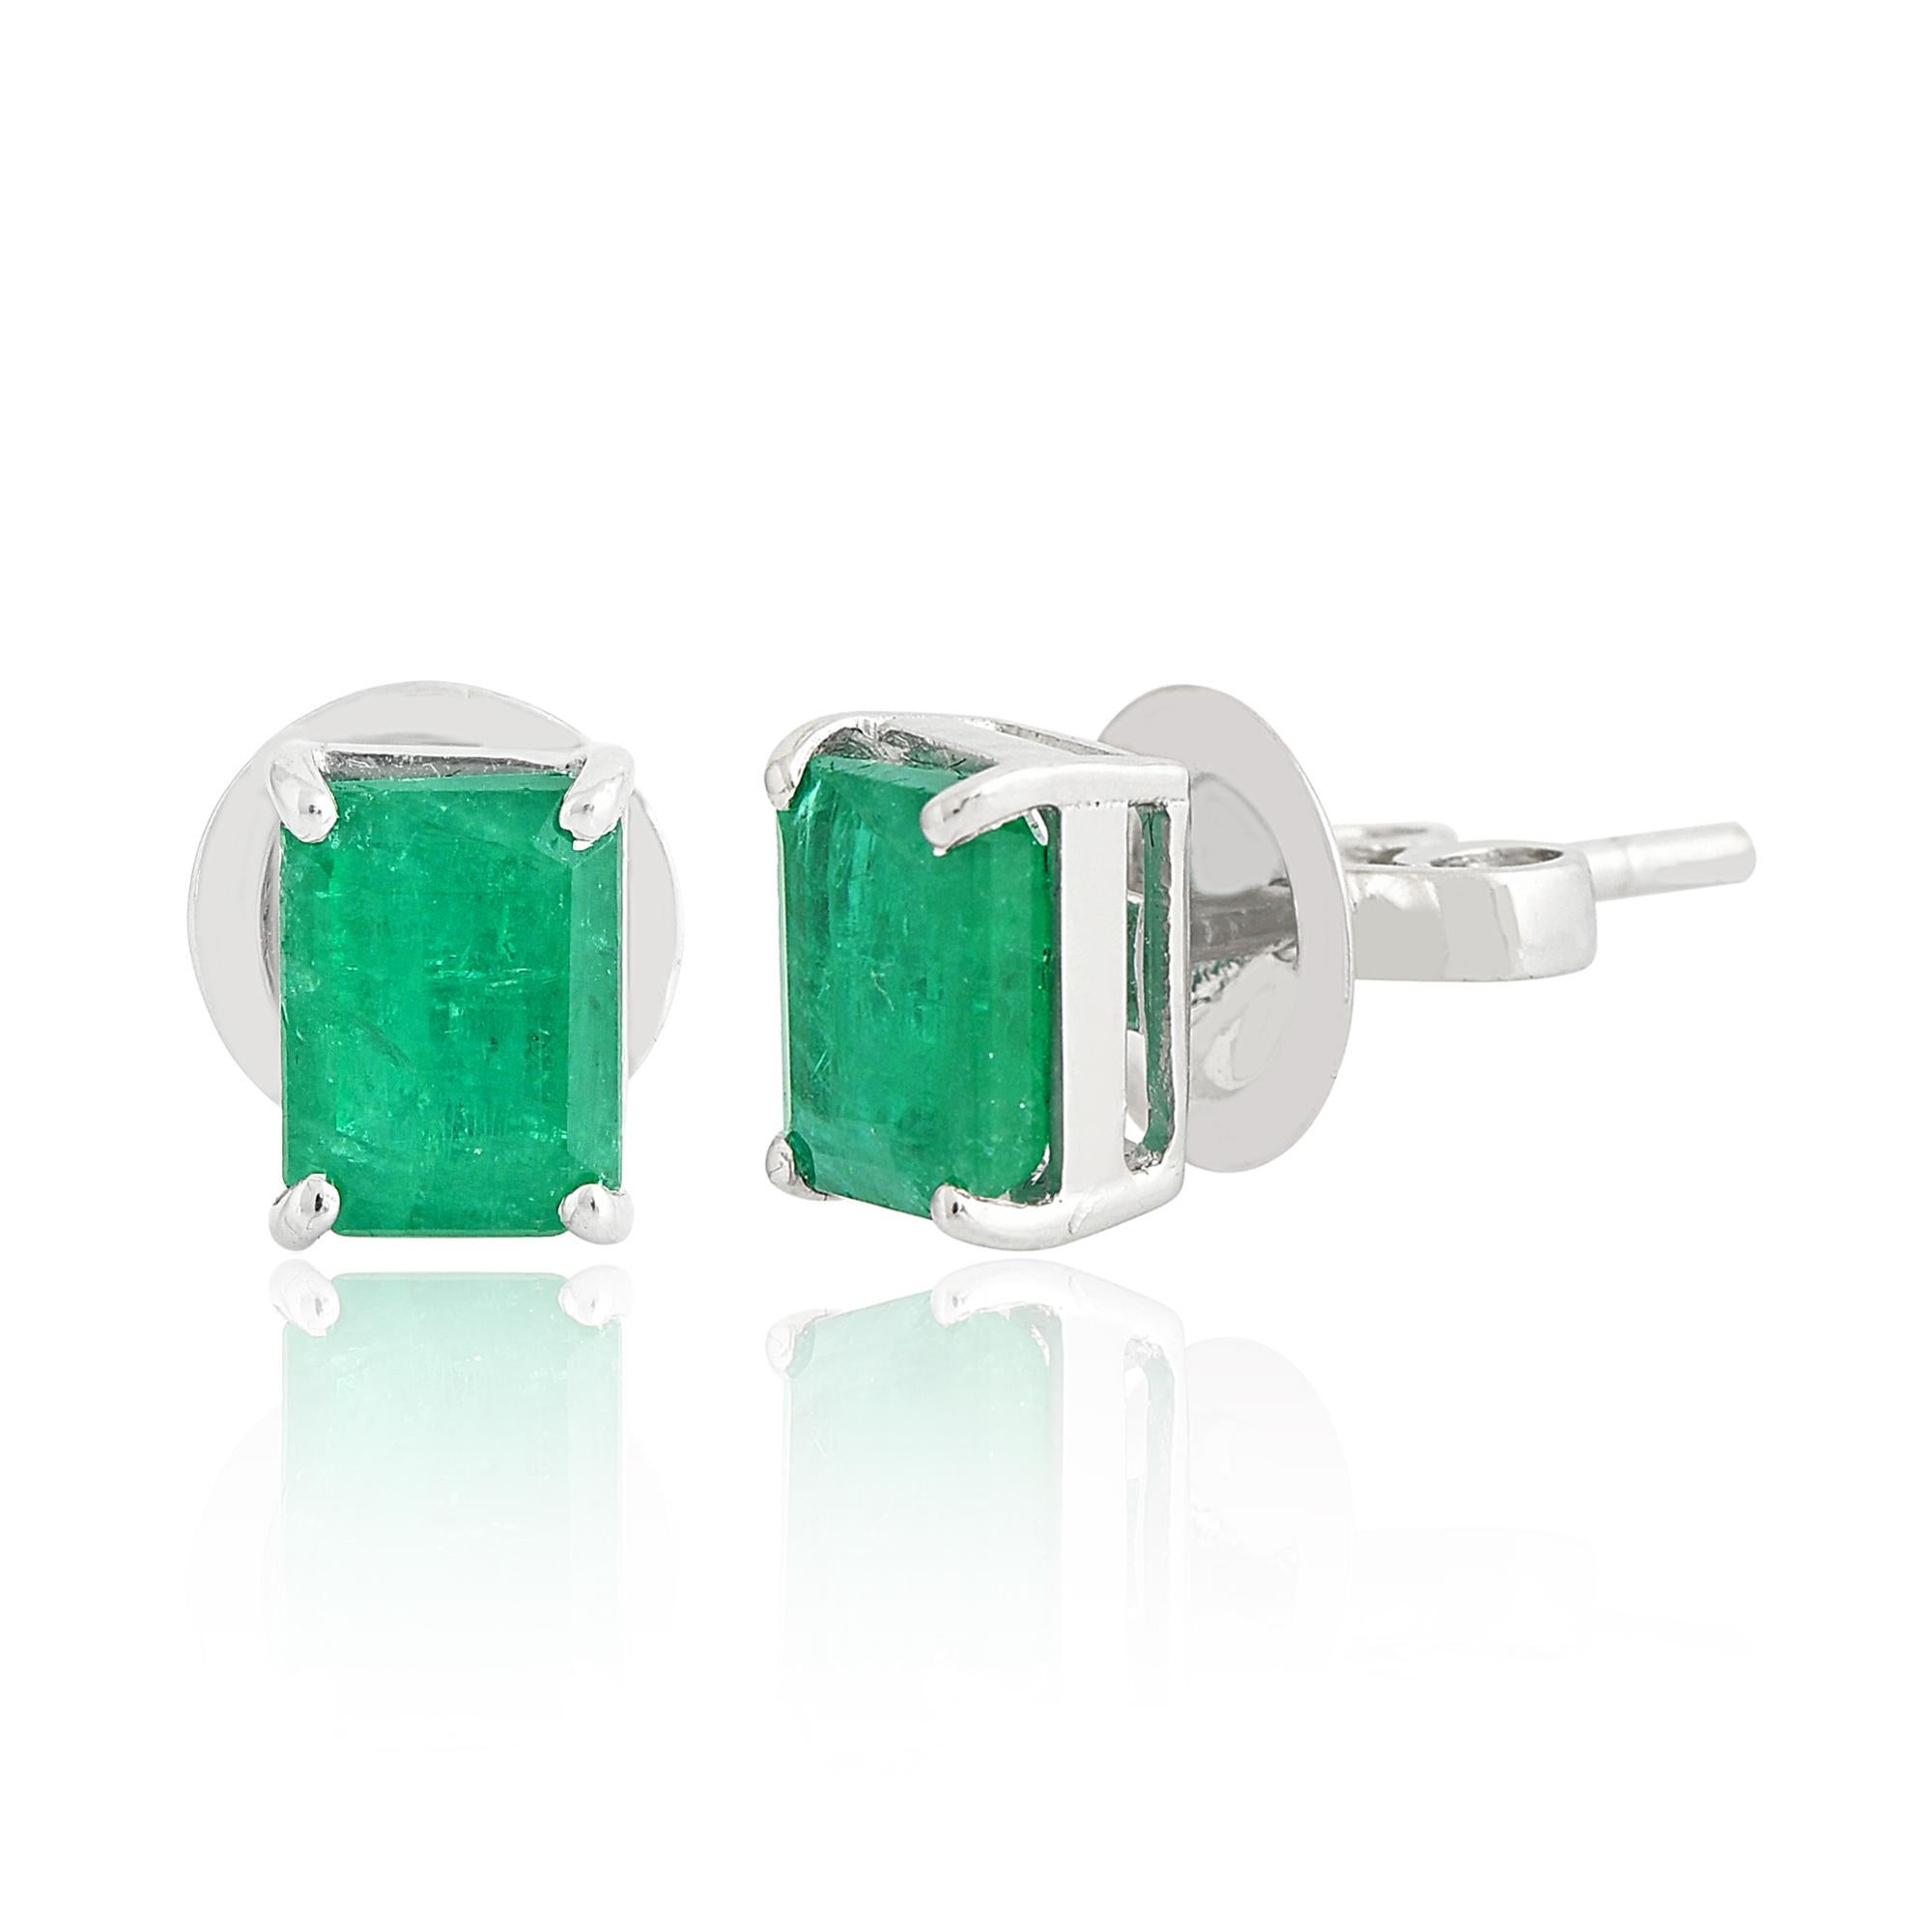 Modern 1.95 Carat Natural Emerald Gemstone Stud Earrings Solid 18k White Gold Jewelry For Sale